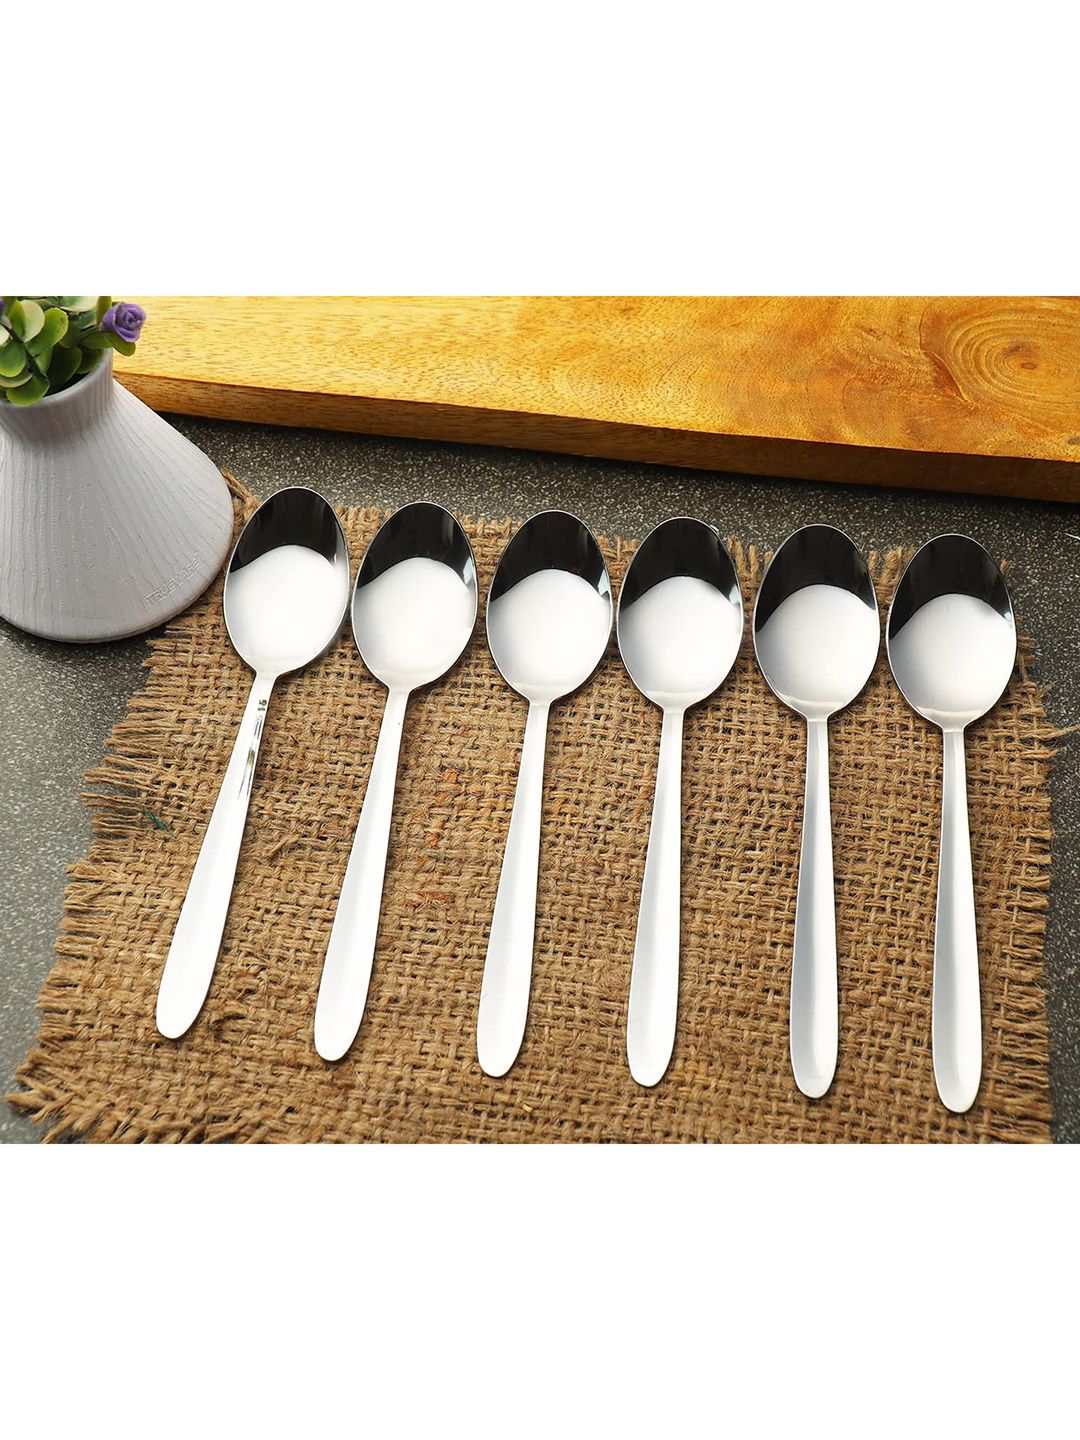 ZEVORA Set Of 6 Silver-Toned Stainless Steel Dinner Spoon Price in India